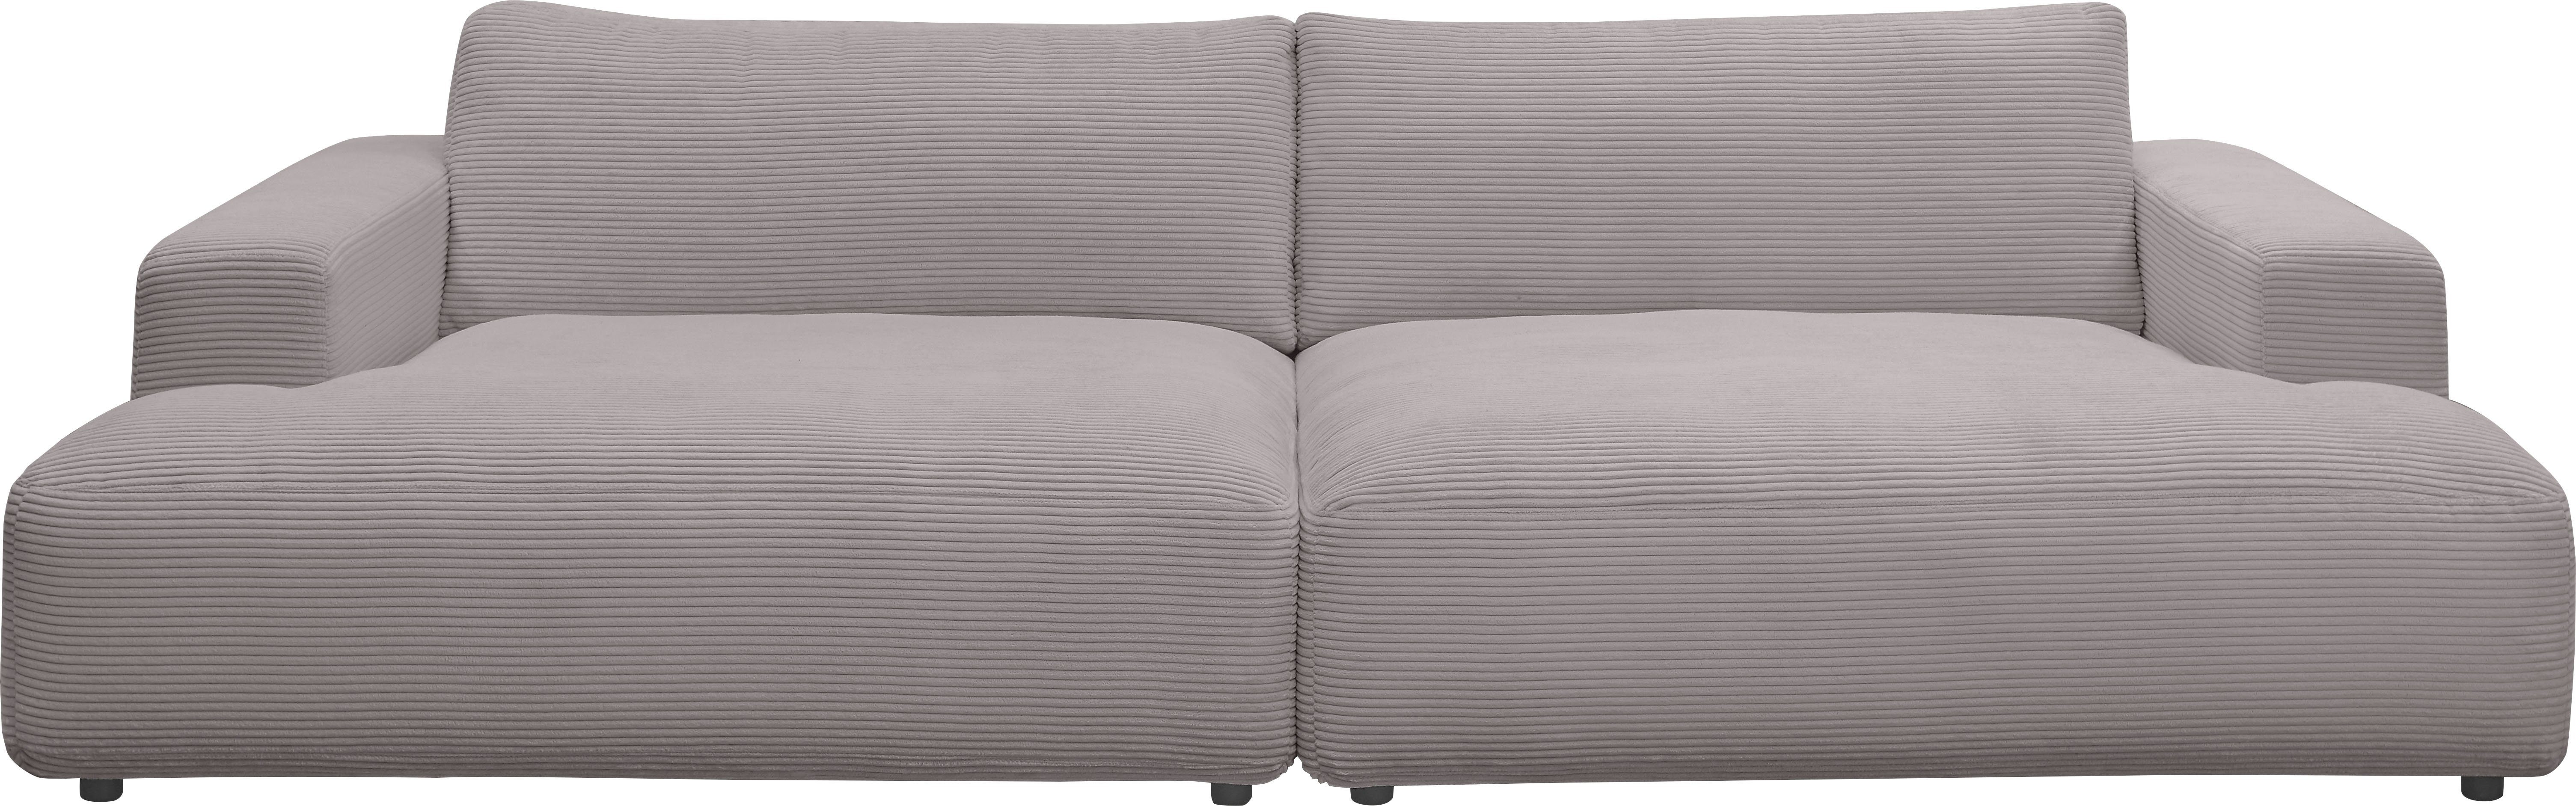 GALLERY M branded cm grey Loungesofa Lucia, Cord-Bezug, Breite Musterring 292 by